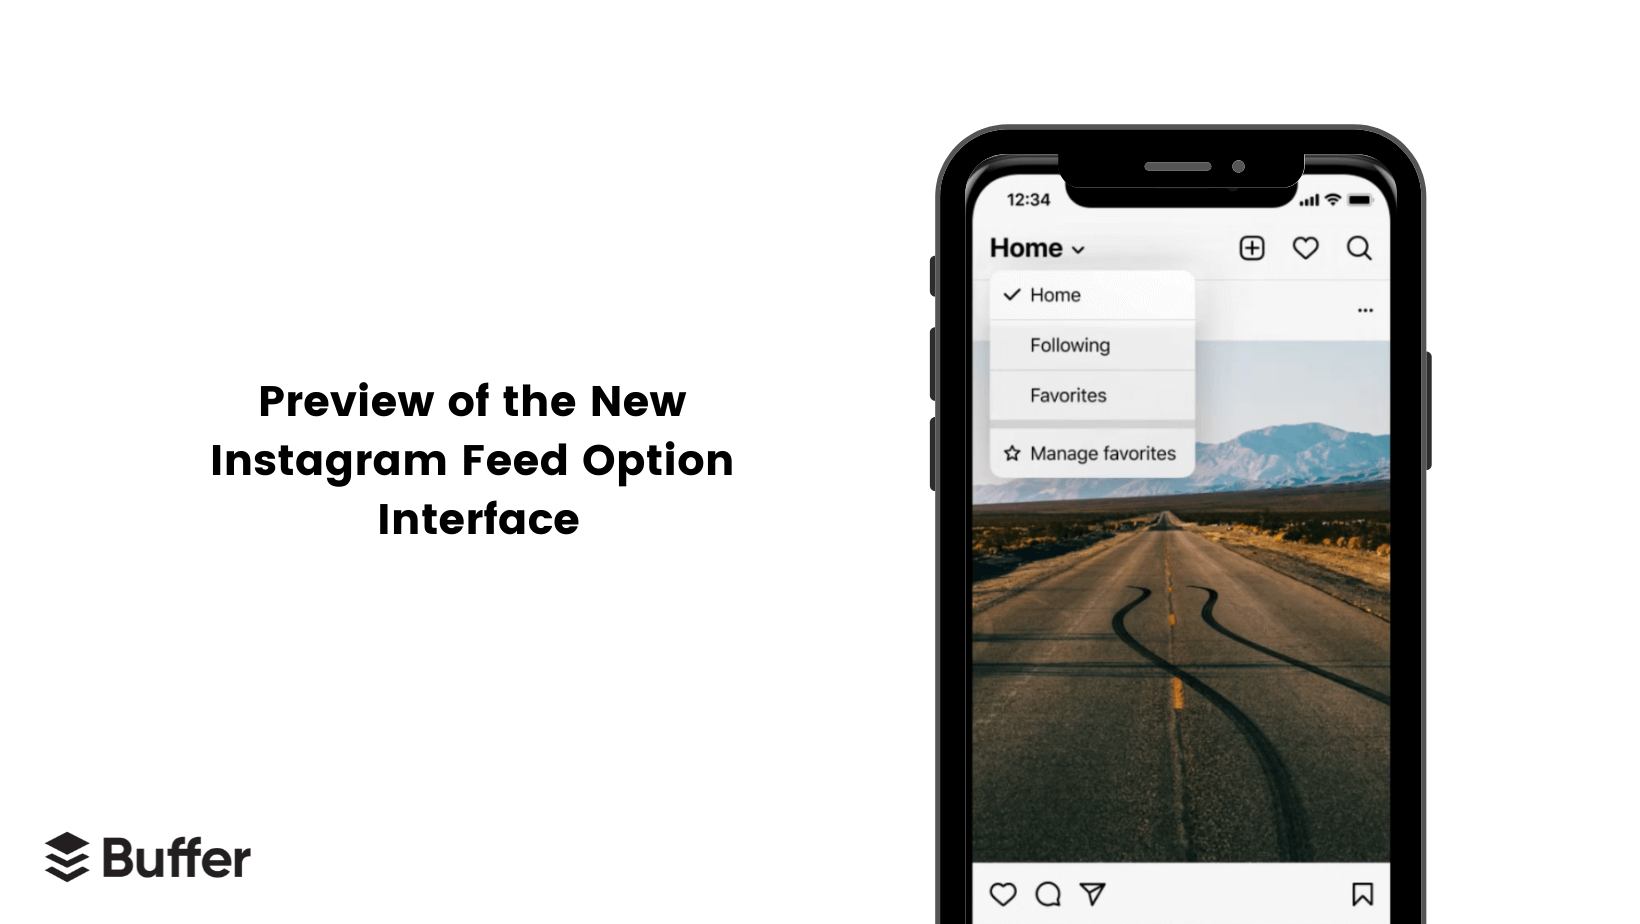 Preview of the New Instagram Feed Option Interface (Home, Following, Favorites)